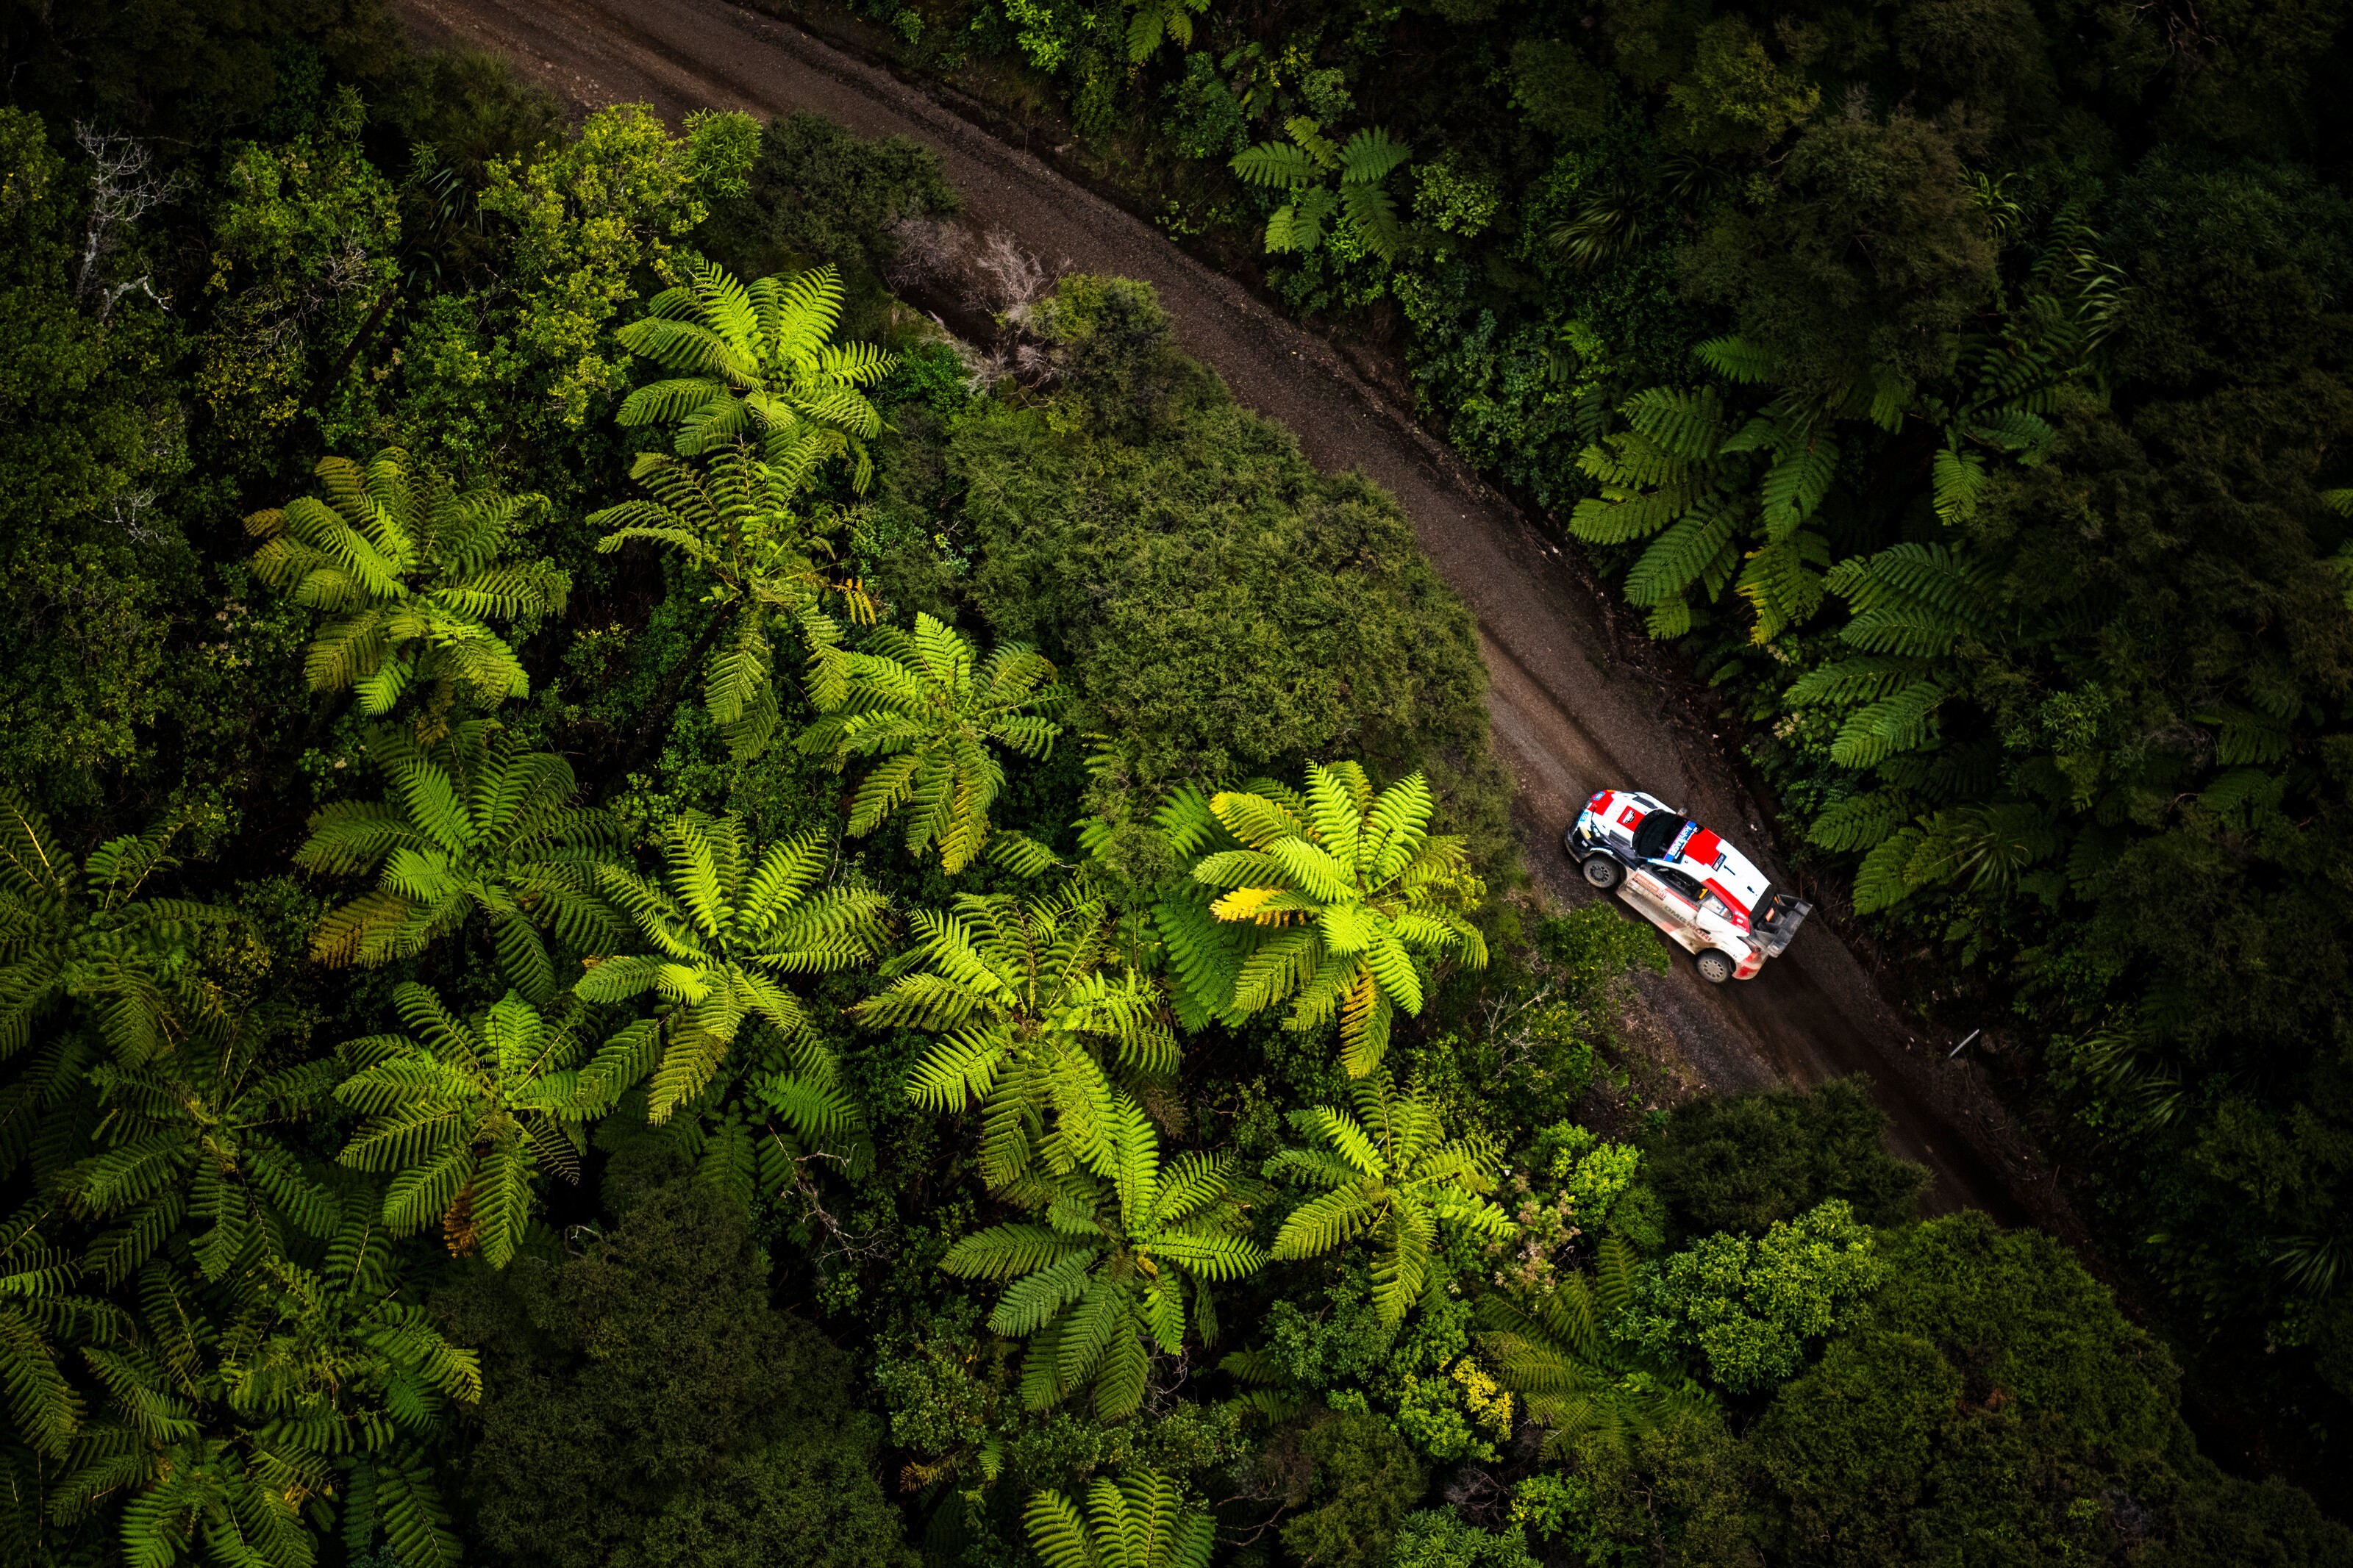 Sebastien Ogier (FRA) Julien Ingrassia (FRA) of team Toyota Gazoo Racing are seen performing during the World Rally Championship New Zealand in Auckland, New Zealand on 30,September (photo: Jaanus Ree / Red Bull Content Pool)